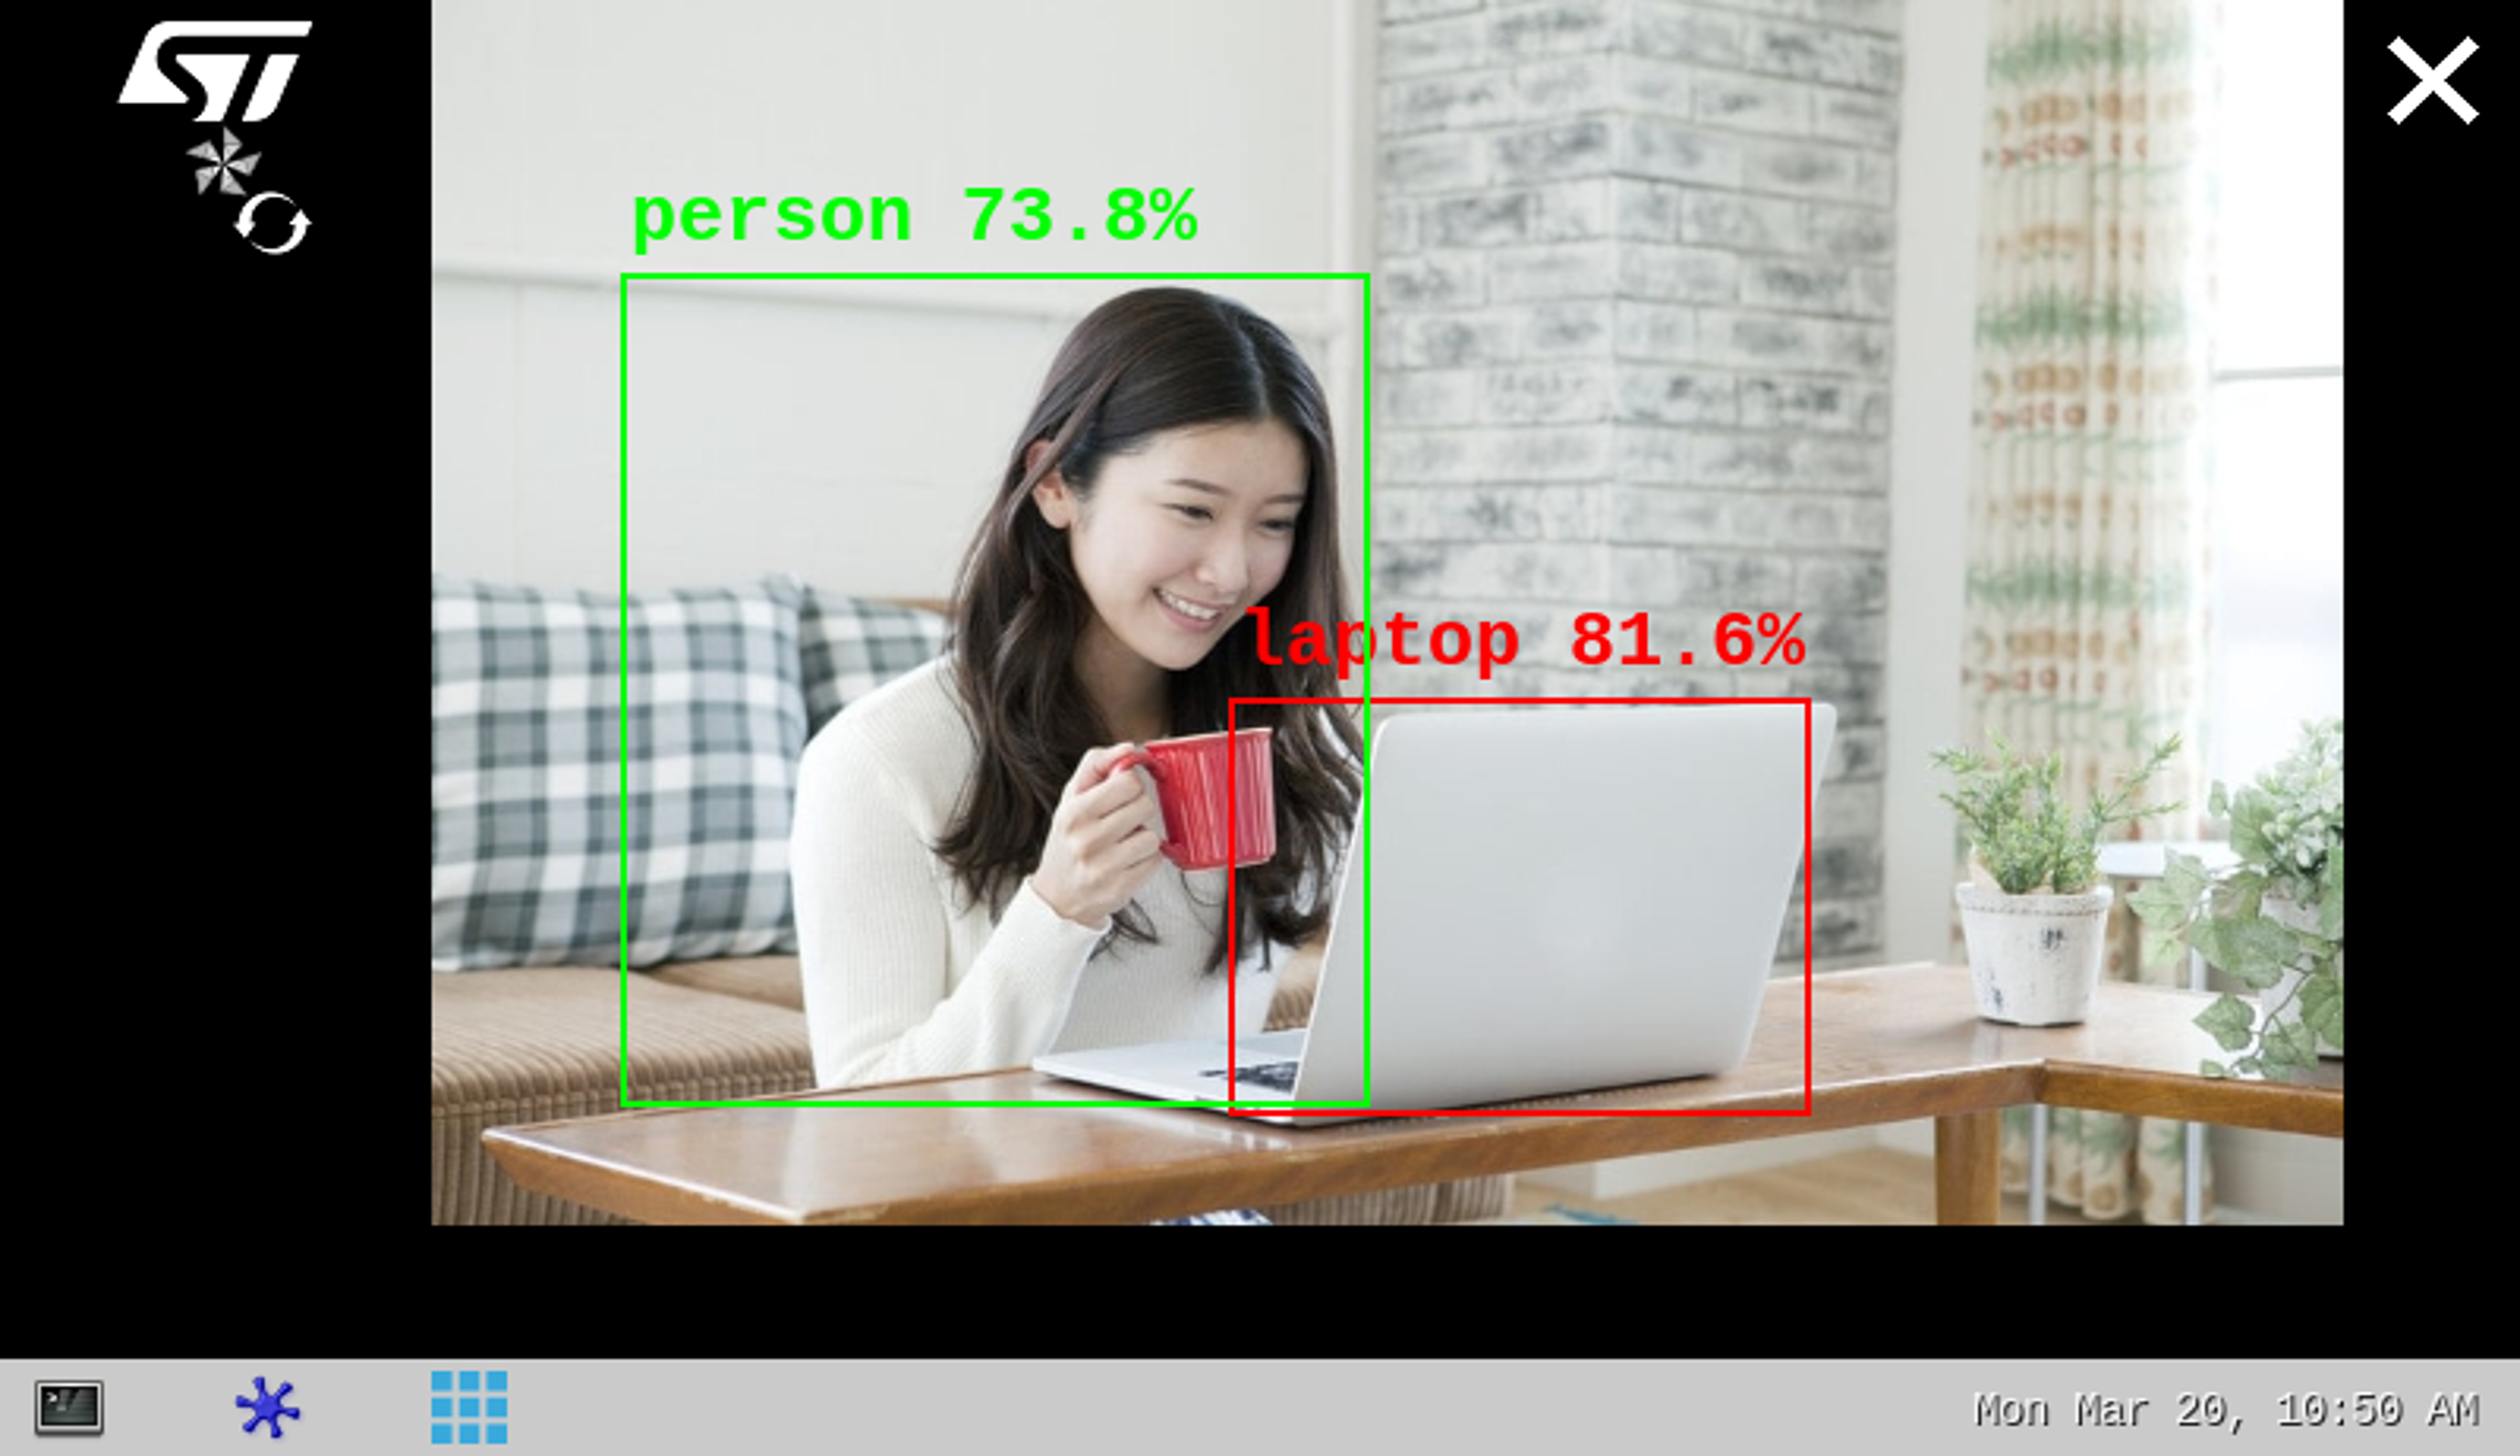 ONNX C++ API runtime object detection application